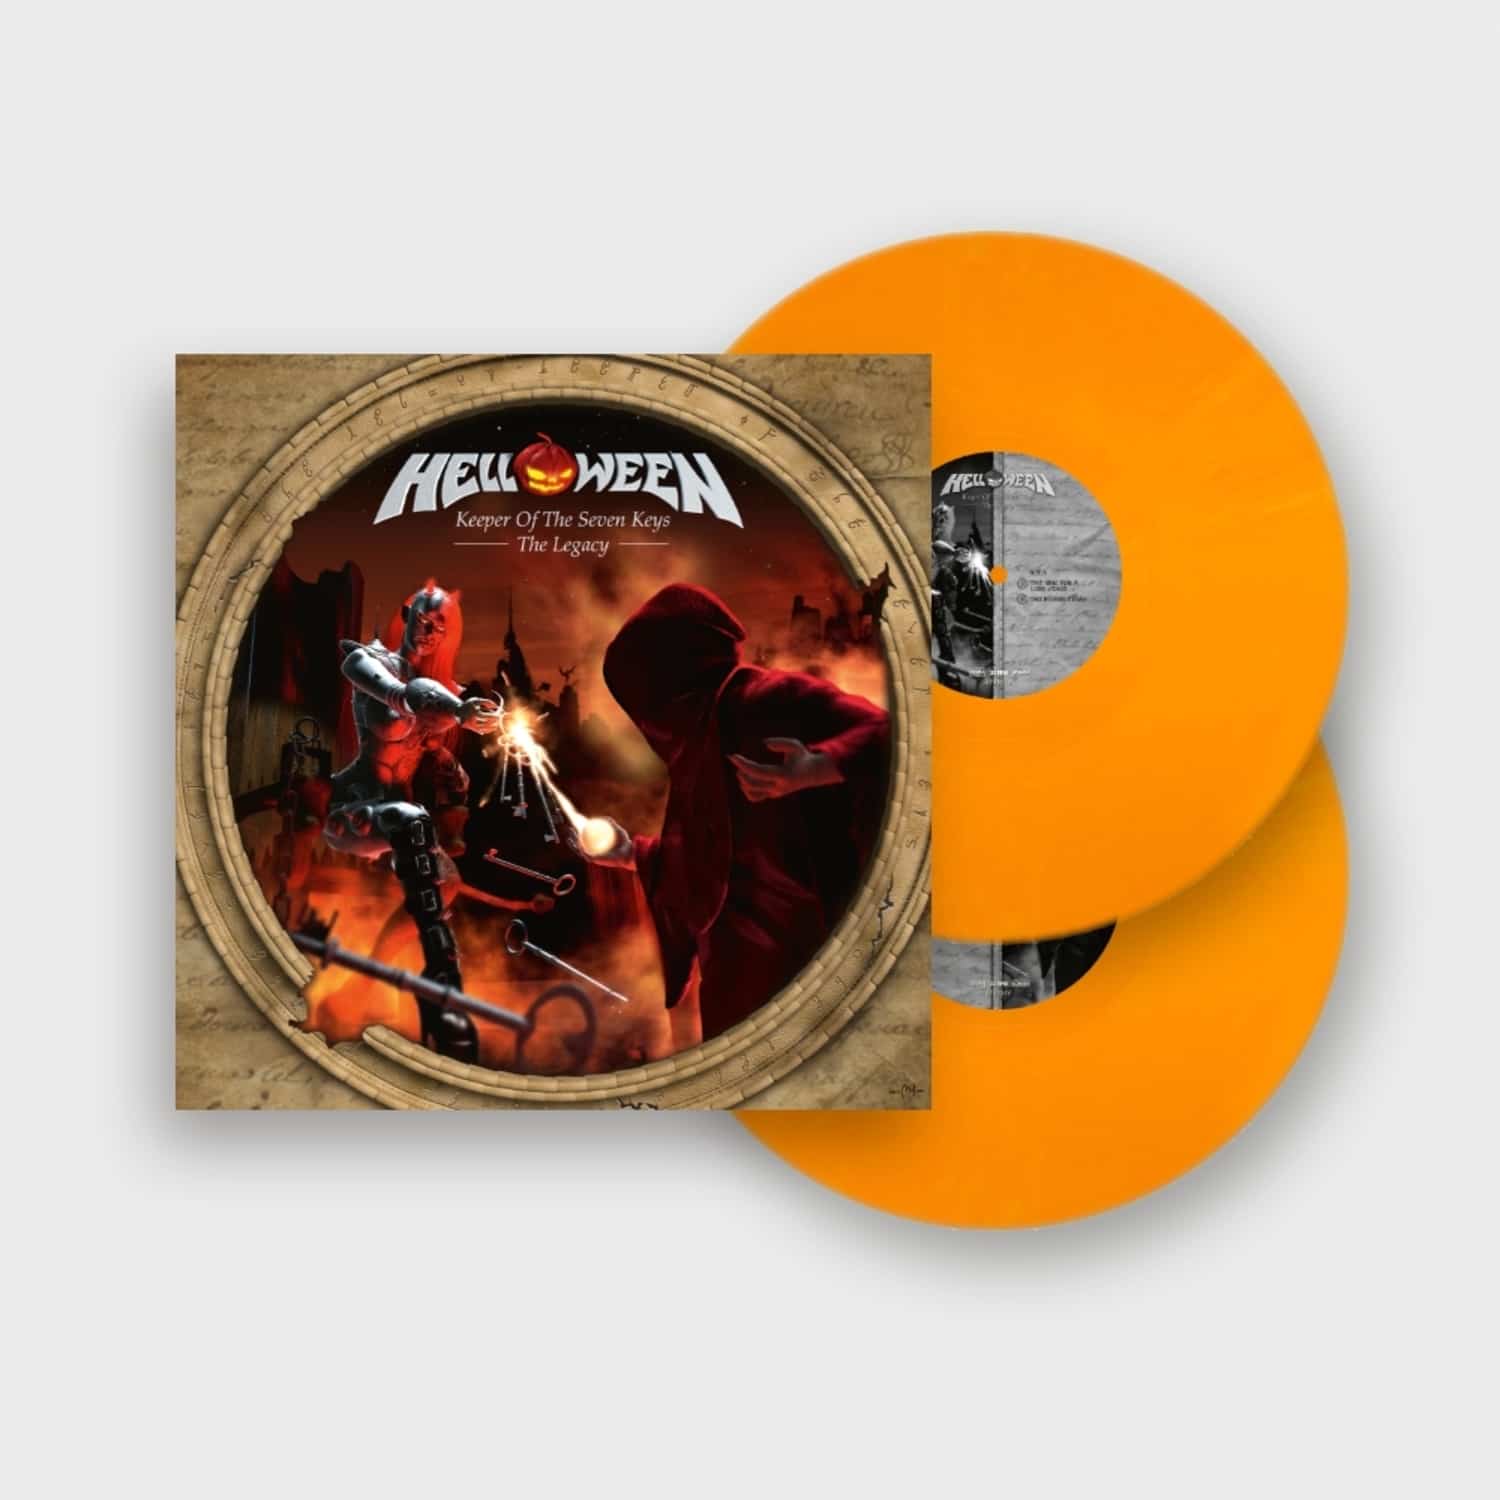 Helloween - KEEPER OF THE SEVEN KEYS:THE LEGACY 